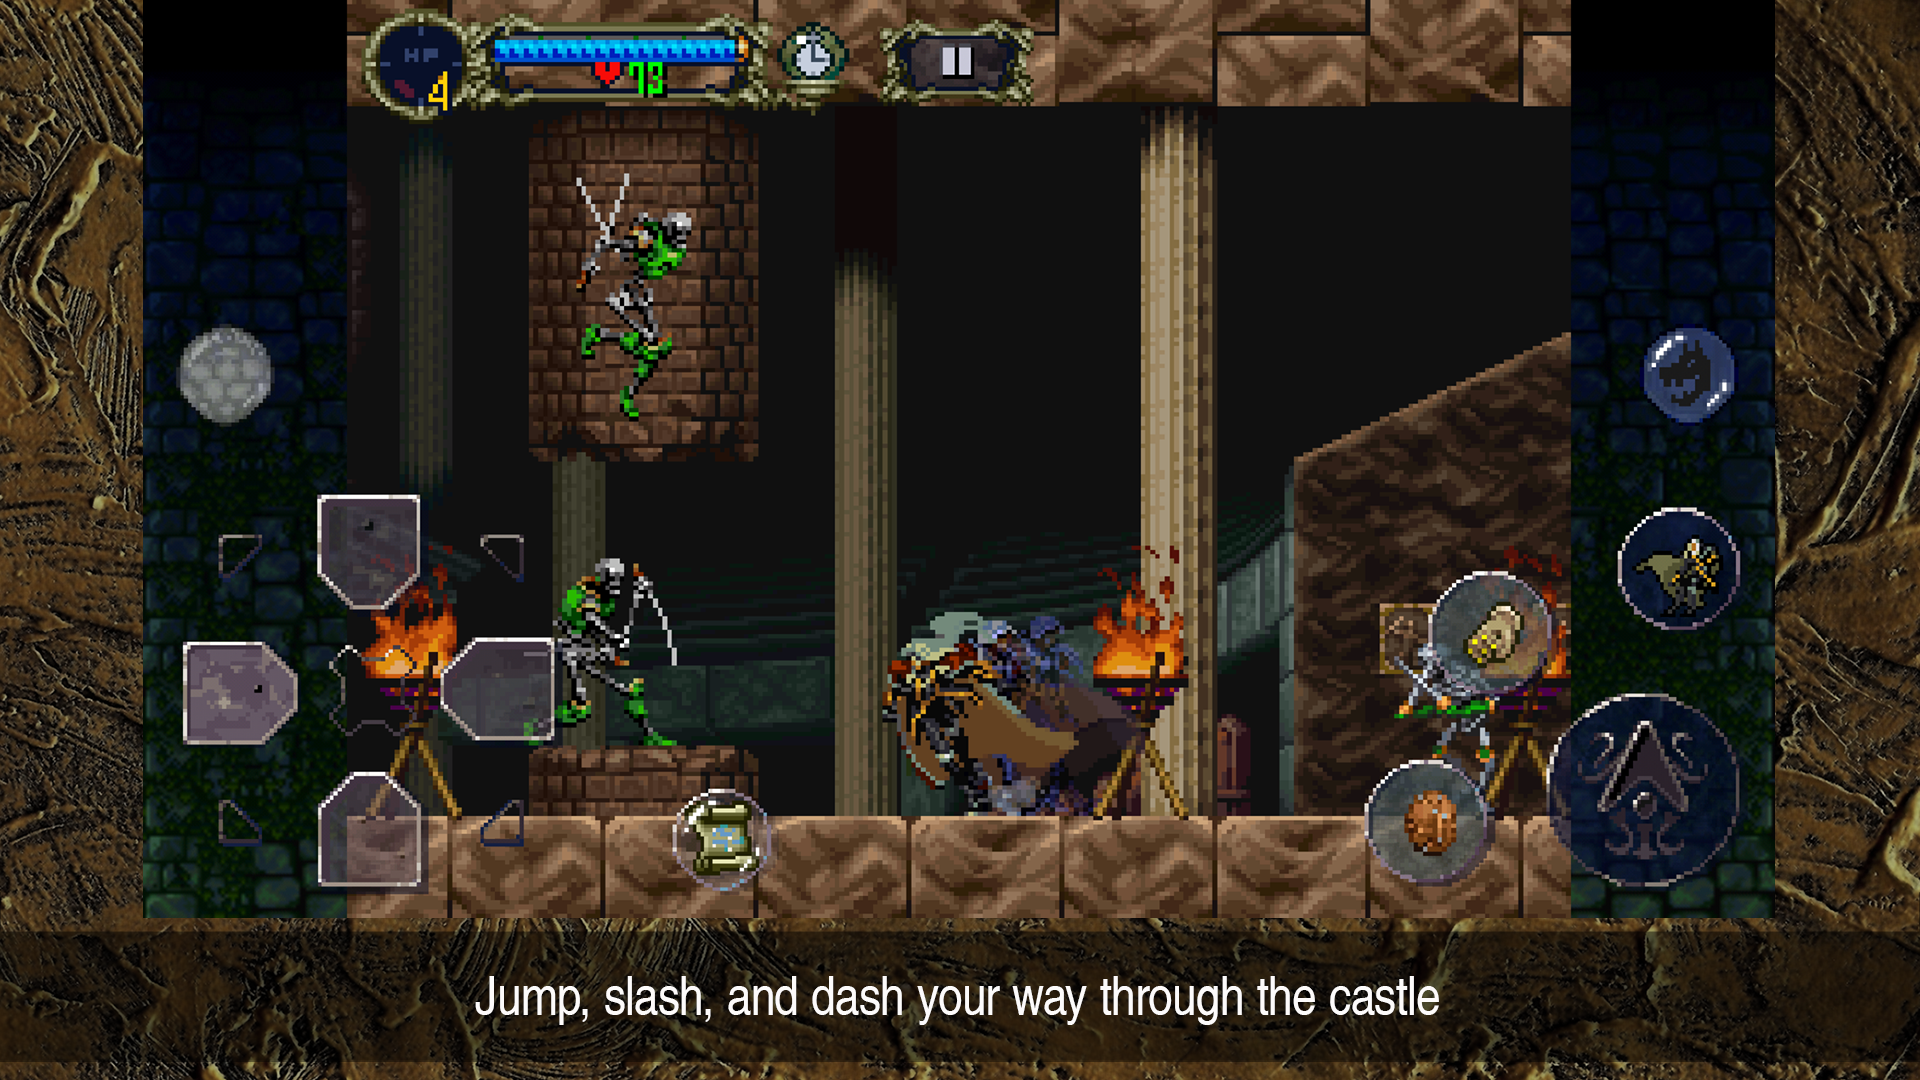 The Castlevania game screen showing a character dashing through the castle.